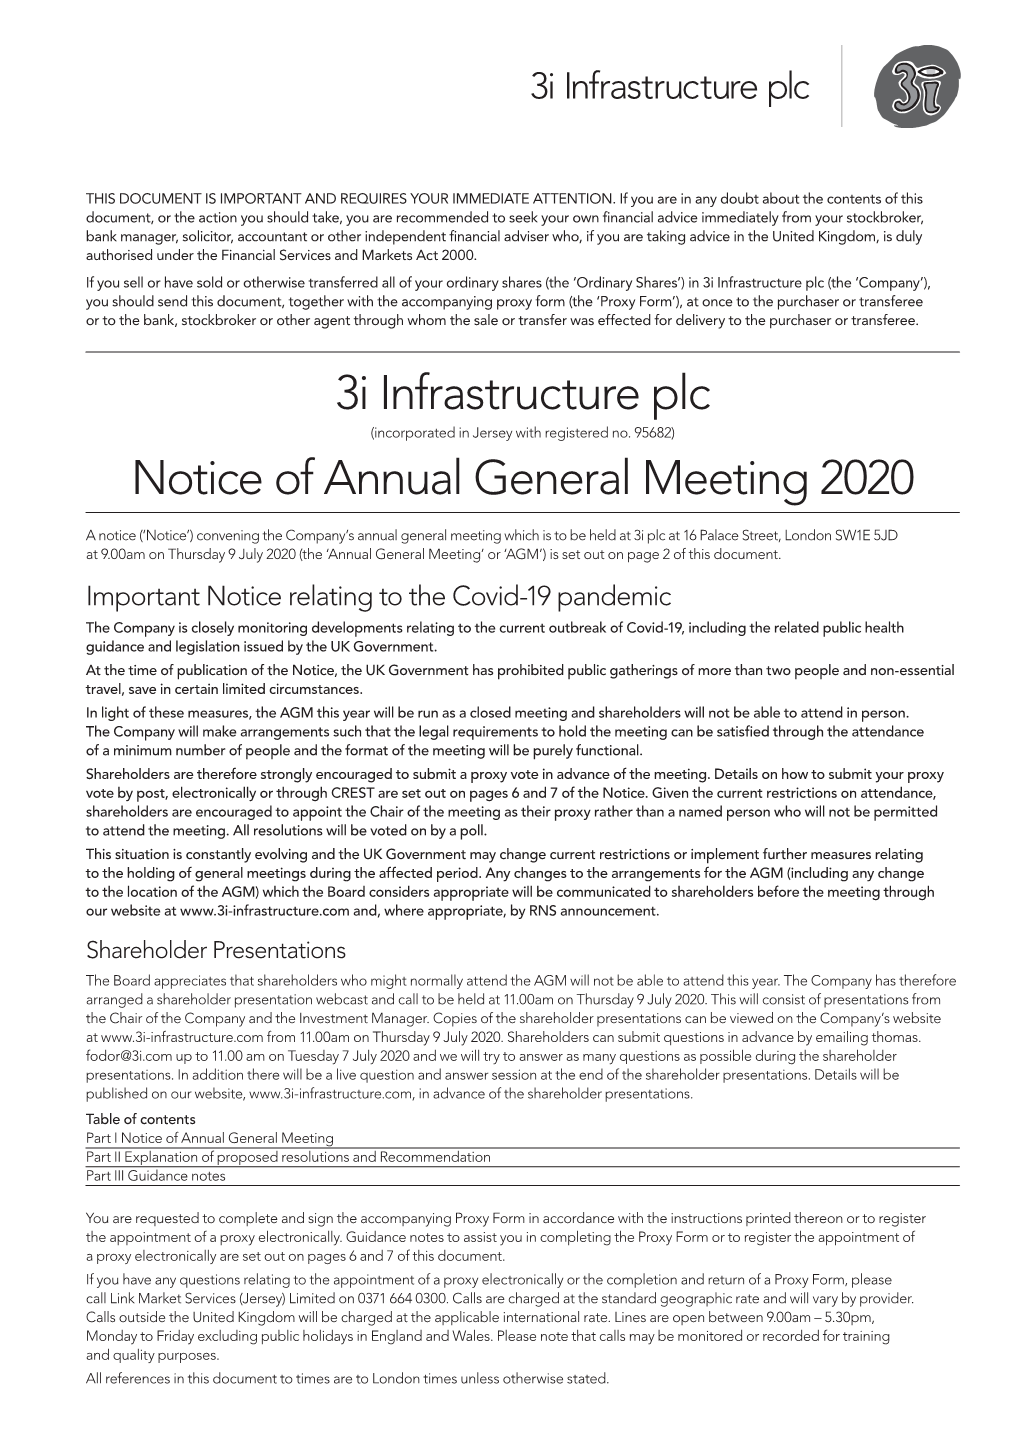 3I Infrastructure Plc Notice of Annual General Meeting 2020 Part I